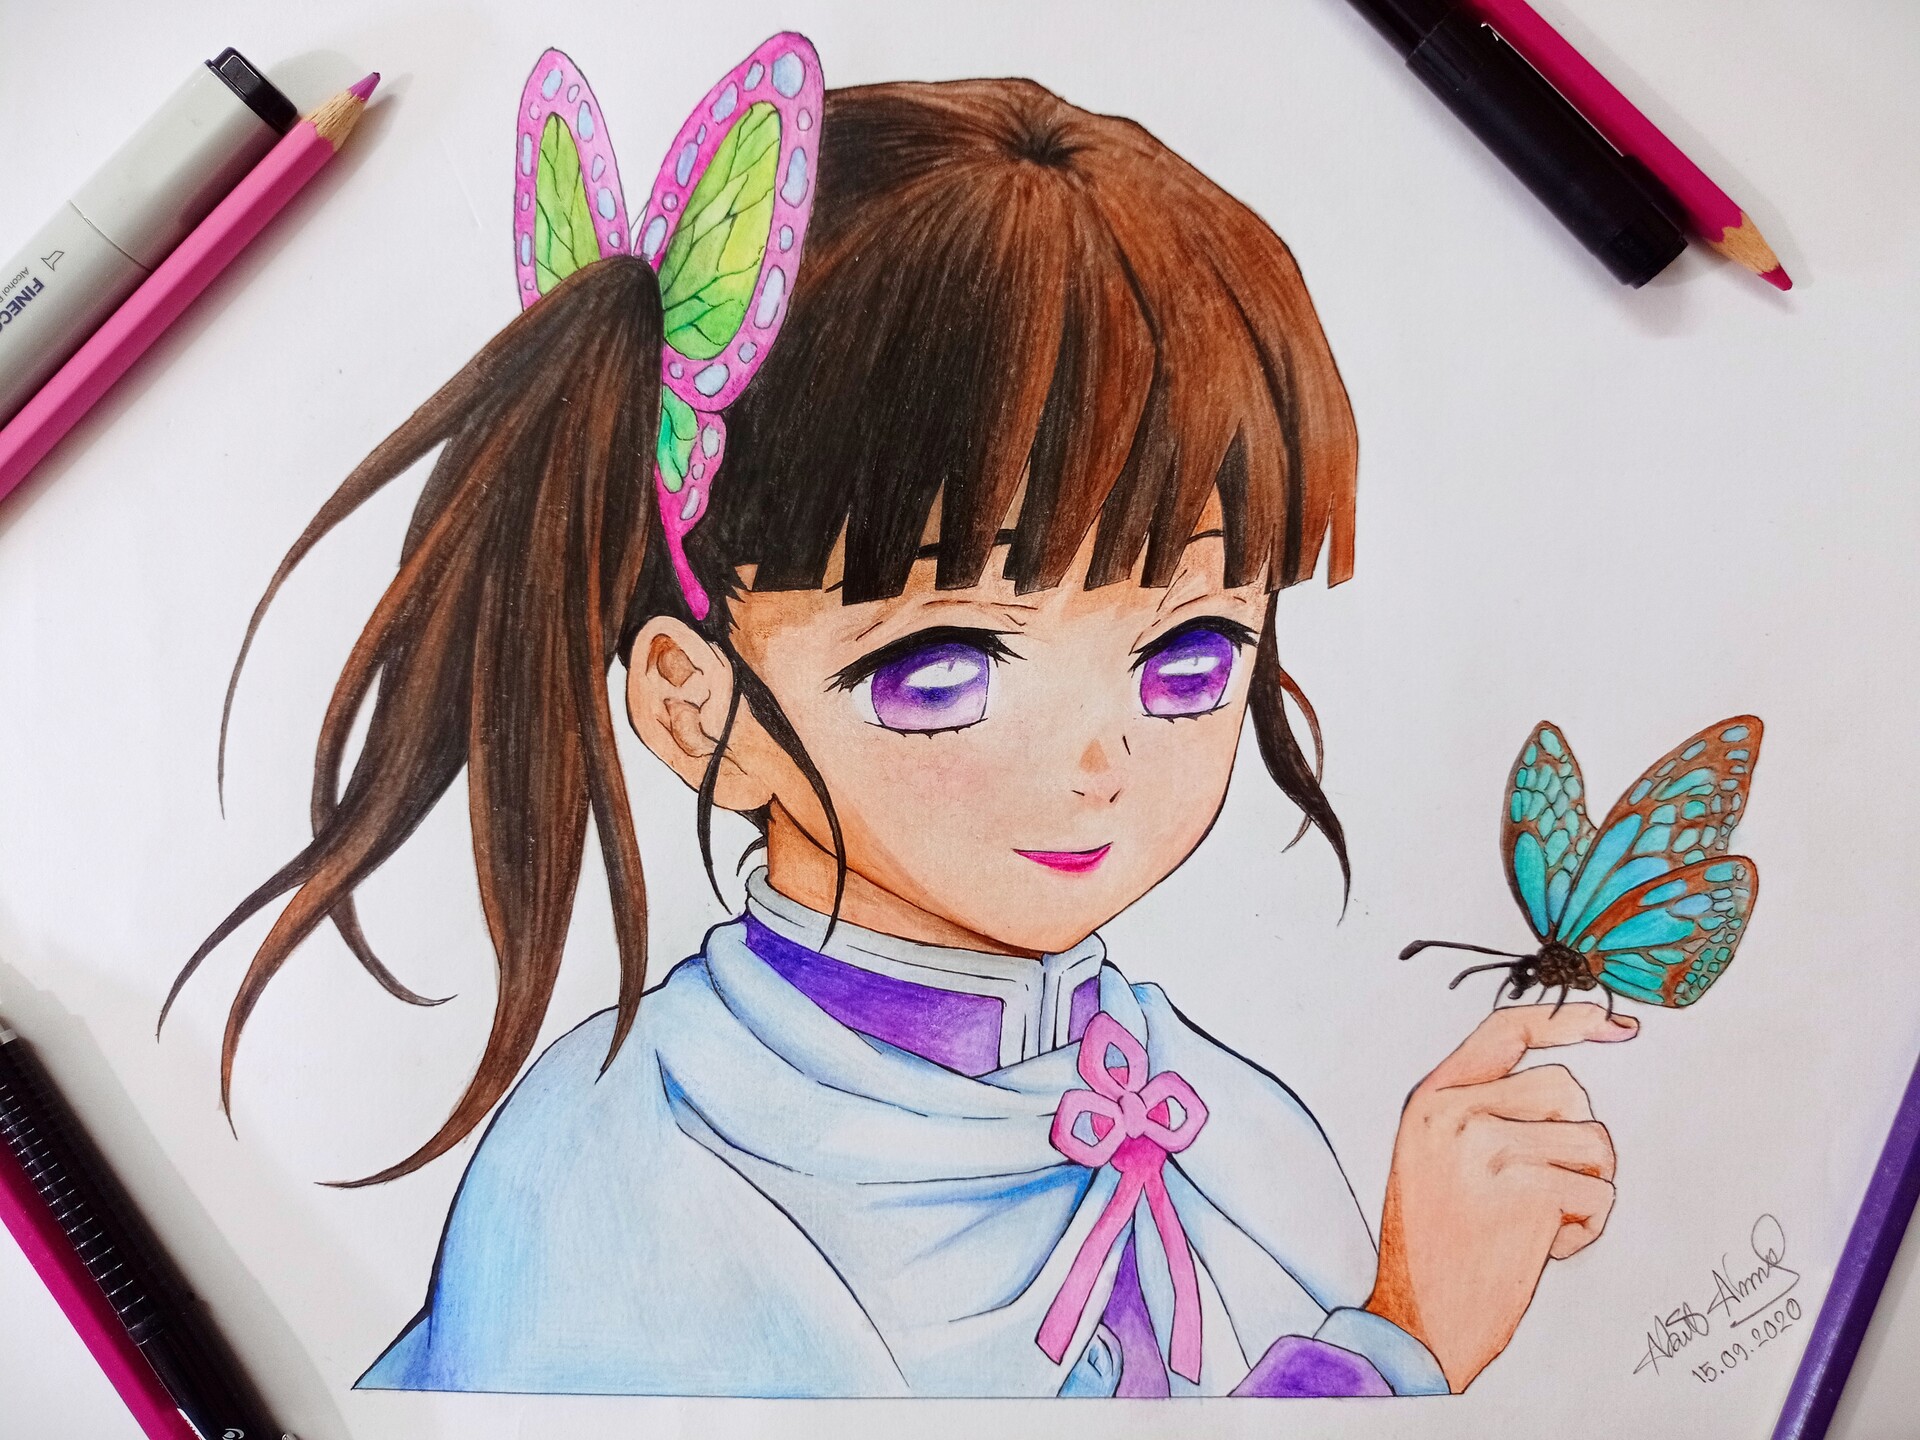 HaleyAngelo Artwork on Twitter A couple drawings from MHA One colored  pencil and the other Copic toradoki MyHeroAcademia bnha mha fanart  anime animeart httpstcoyKNLyrUFSv  Twitter